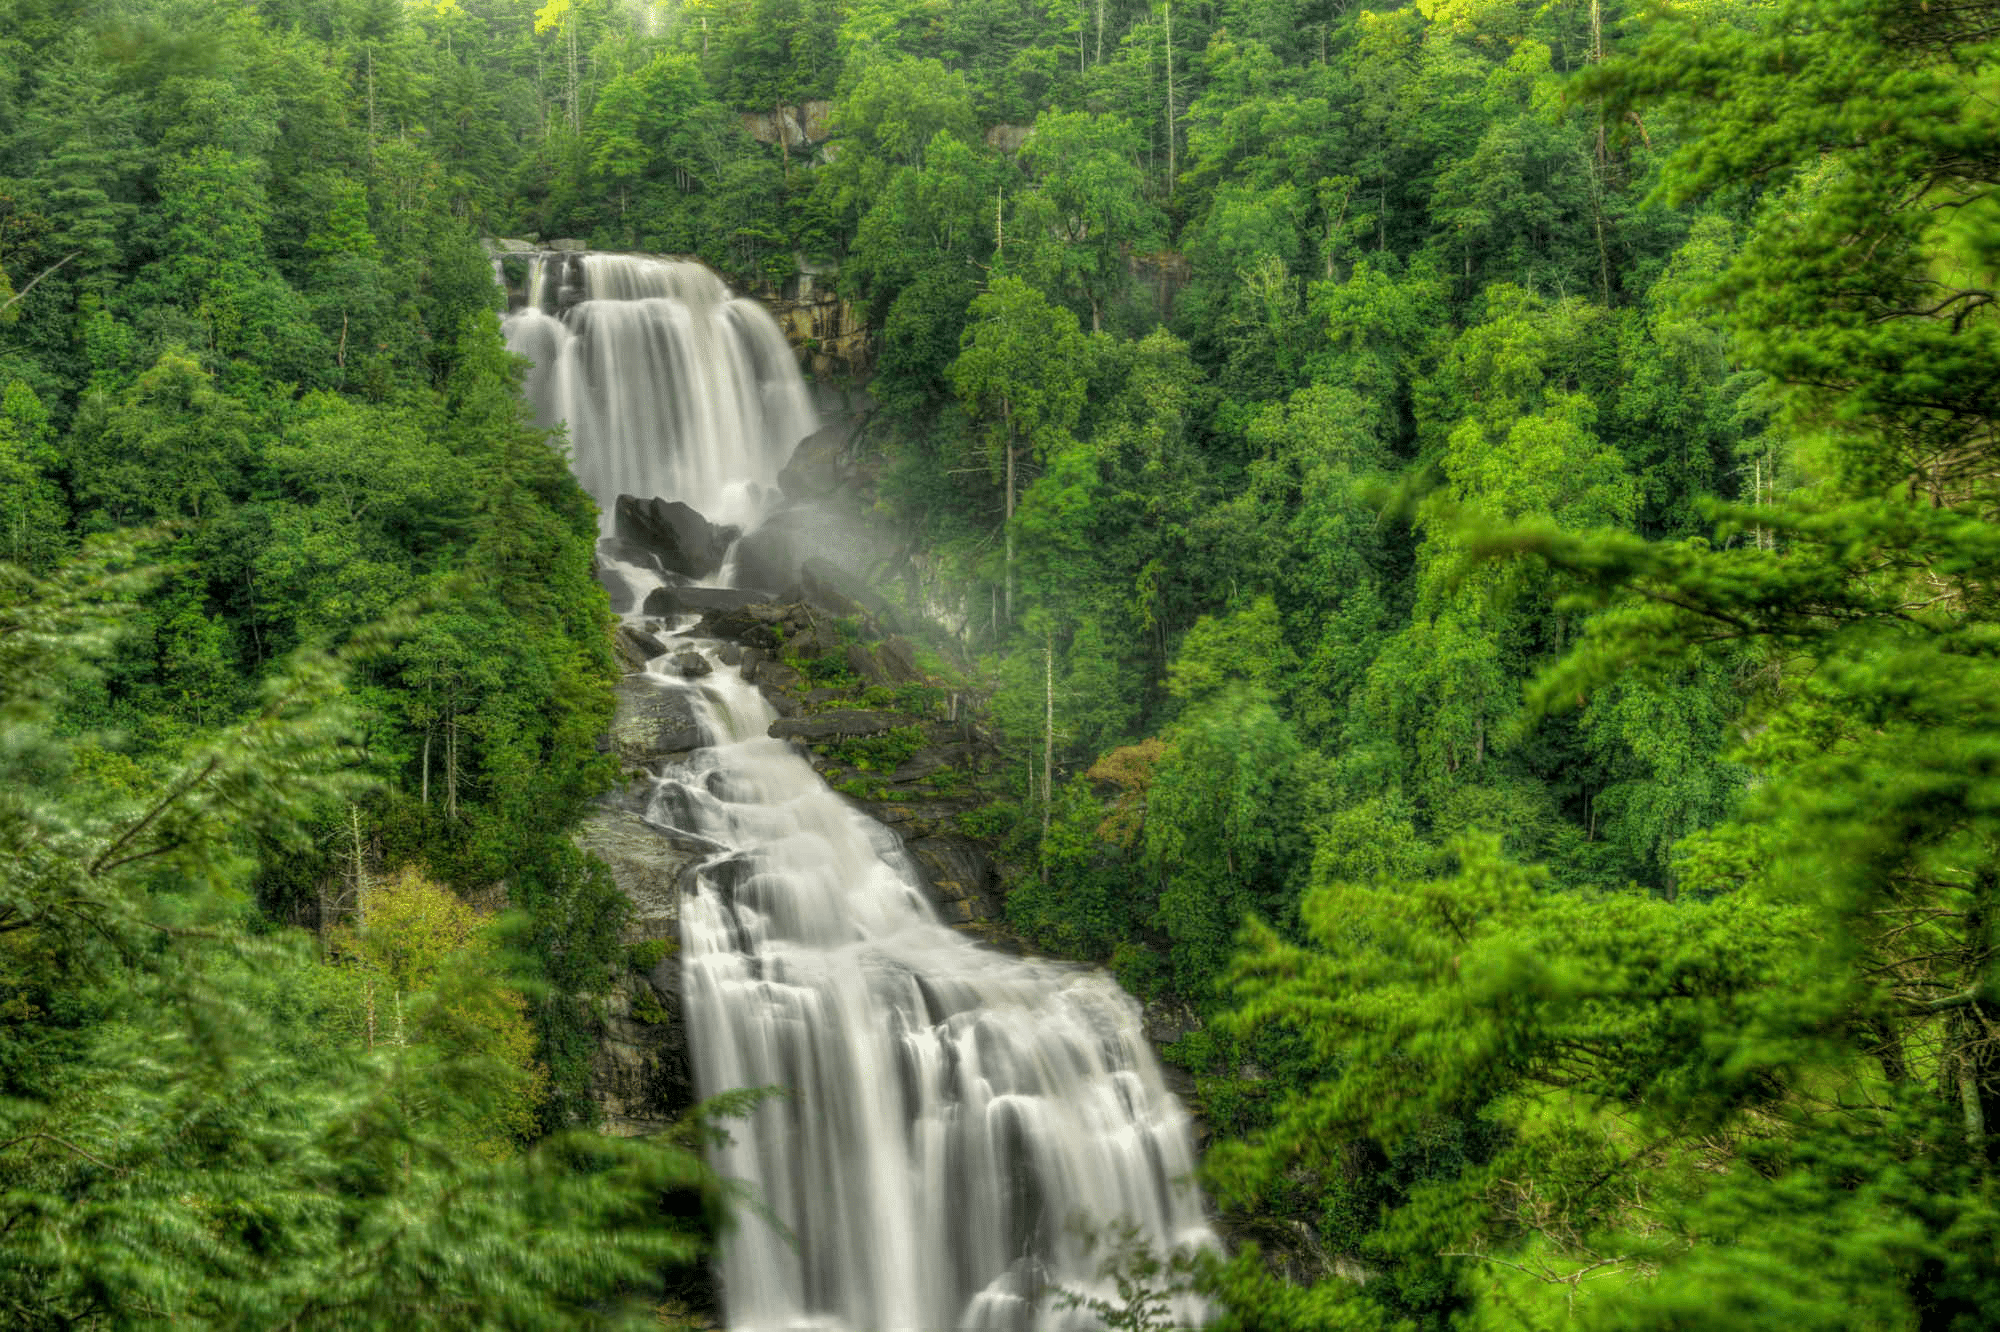 Upper Whitewater Falls is silky smooth while cascading over the rocks surrounded by lush green trees in Nantahala National Forest.